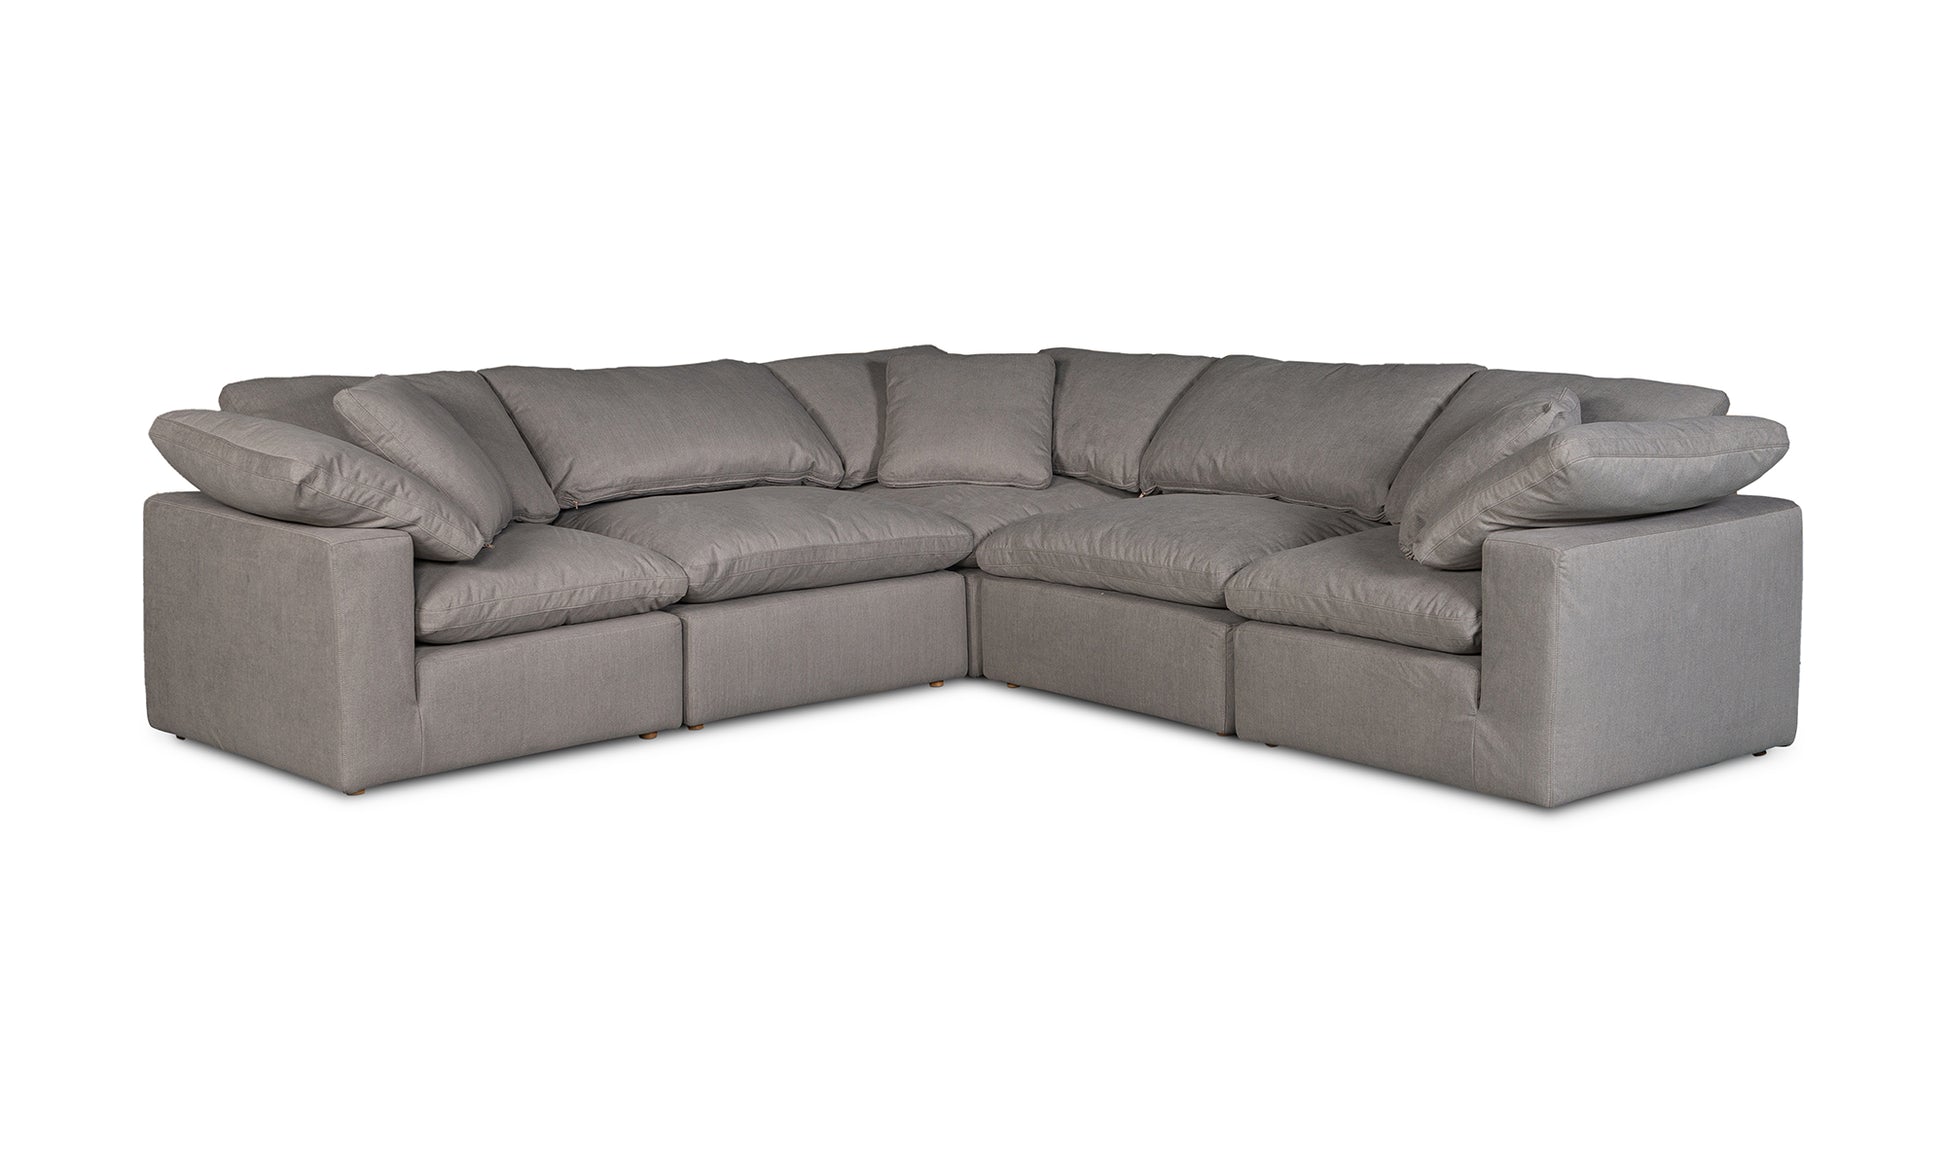 CLAY CLASSIC L MODULAR SECTIONAL.